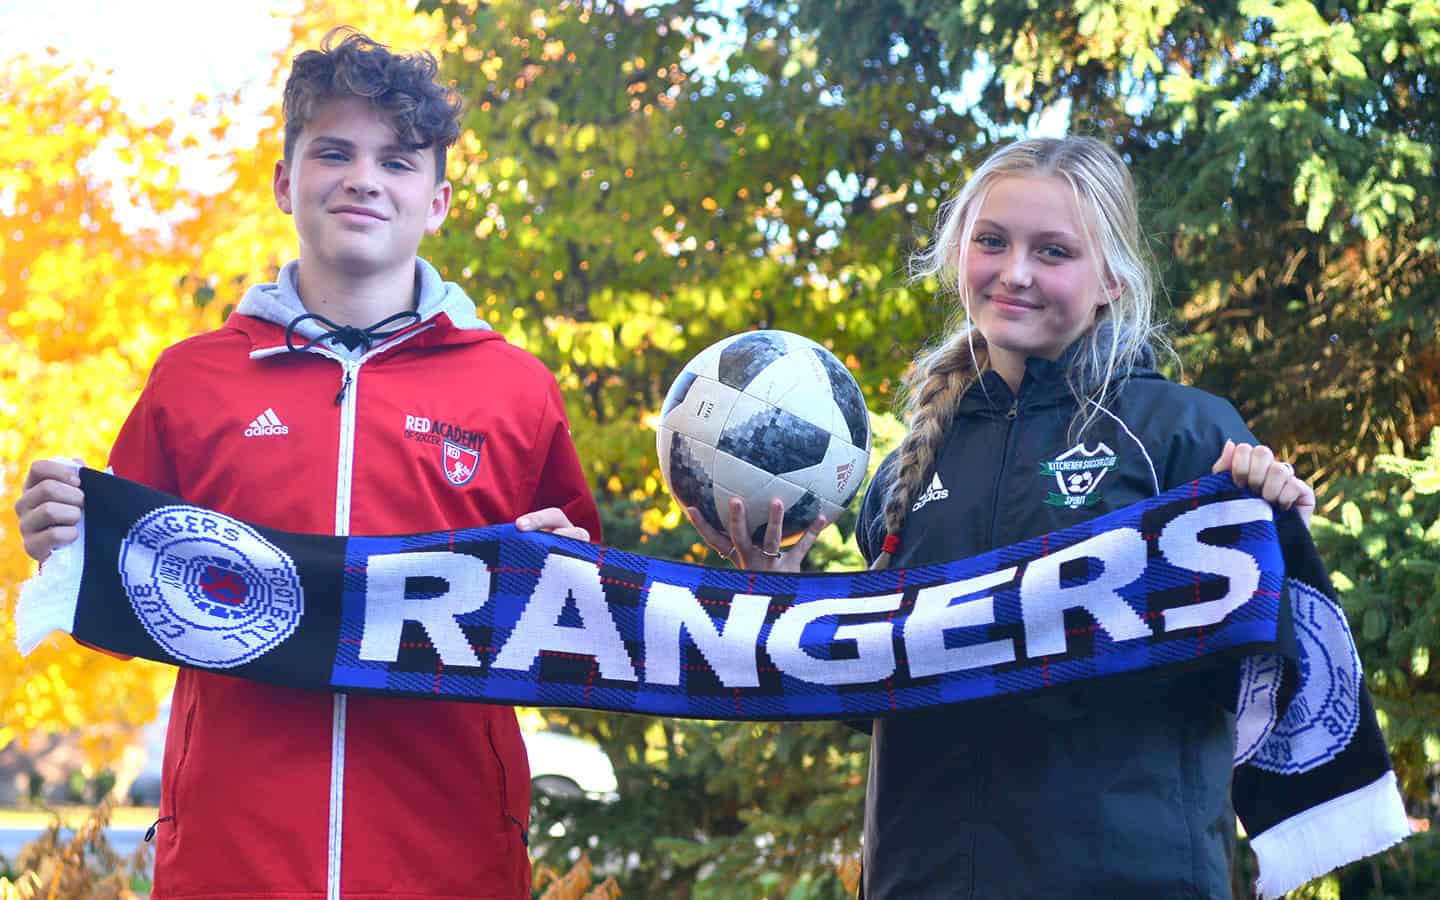 A sibling Scottish odyssey to warm a footballer’s heart